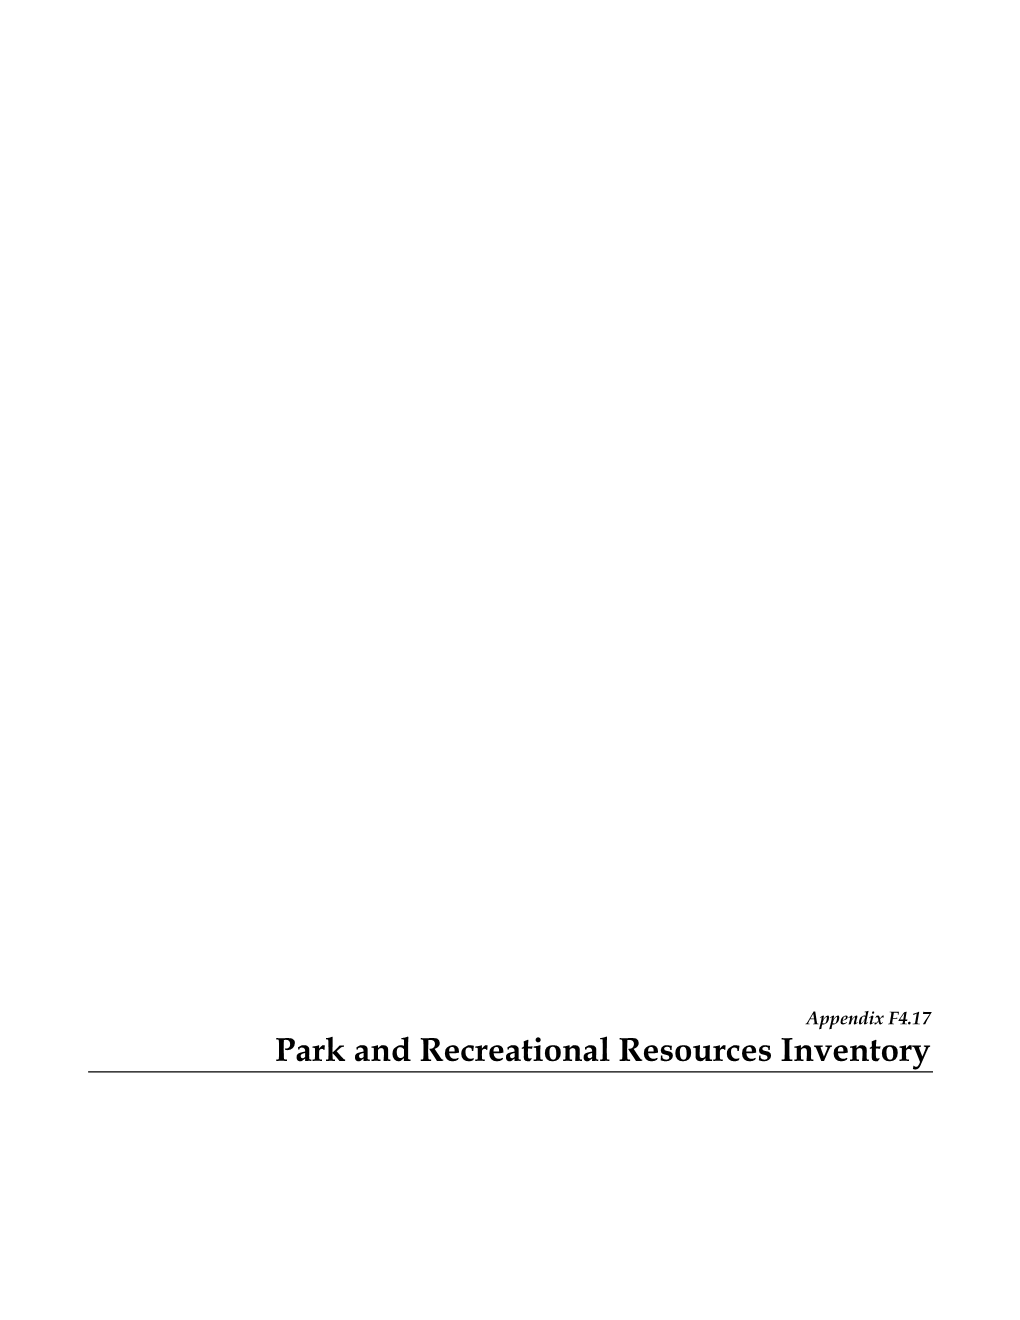 Park and Recreational Resources Inventory